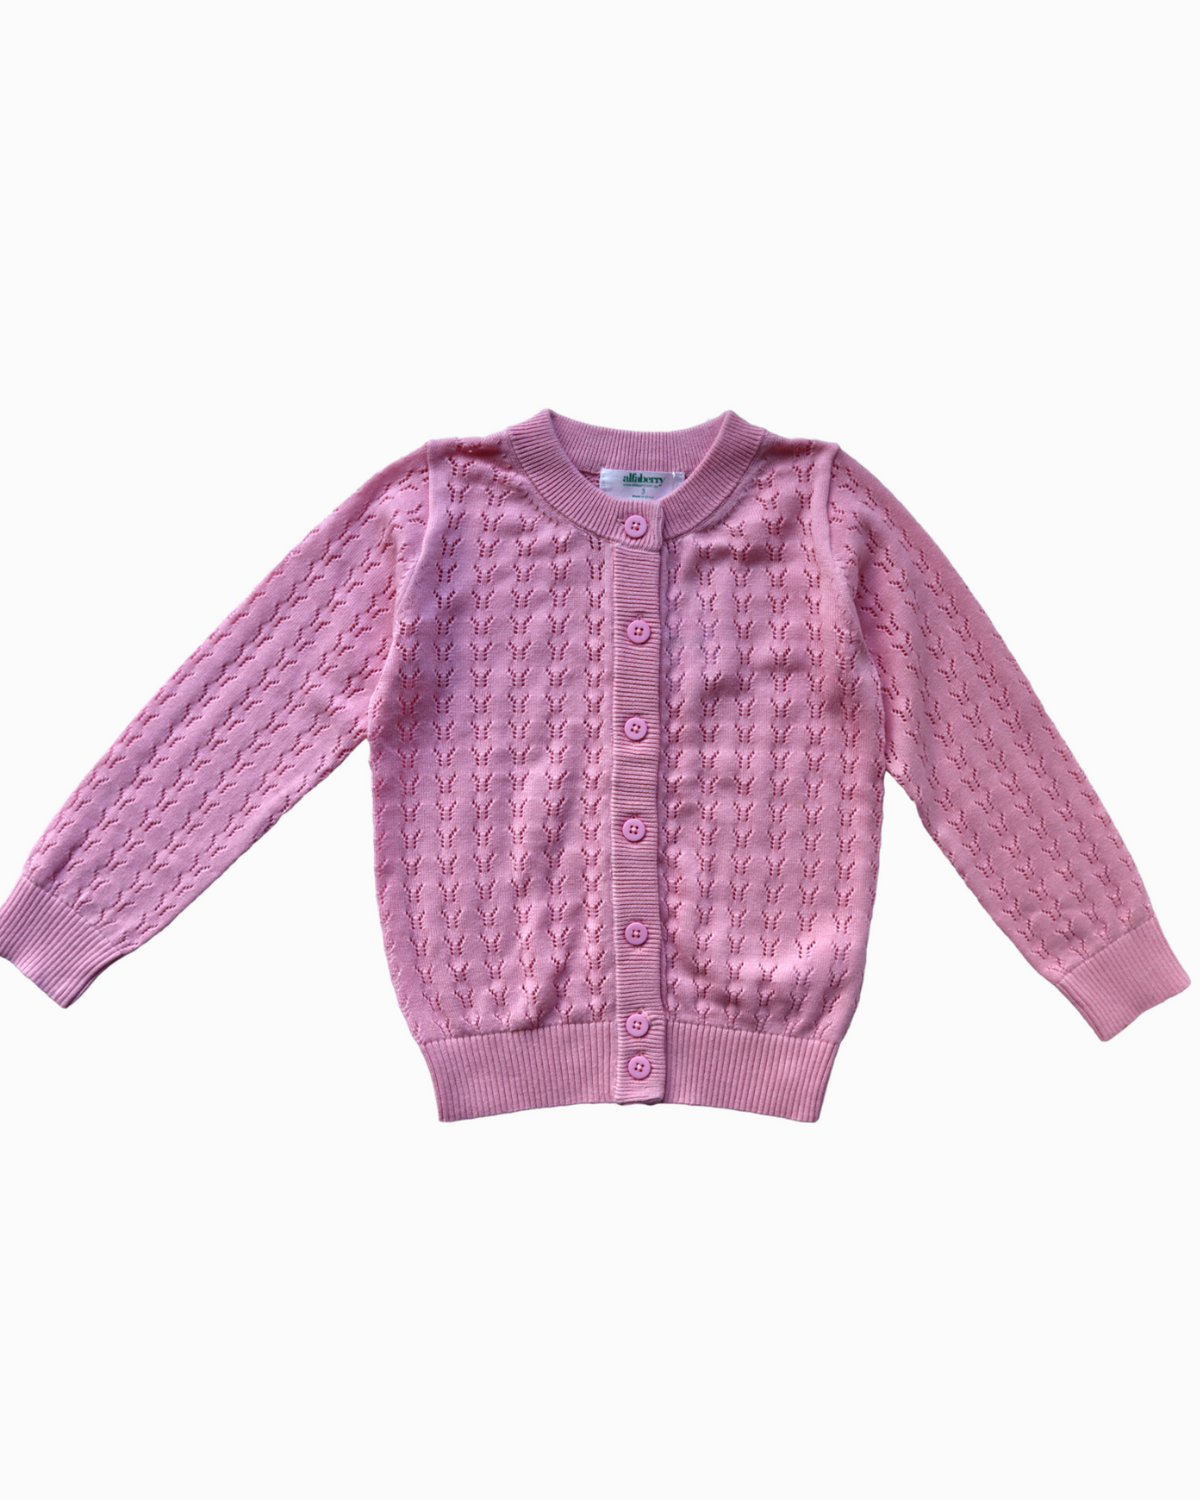 Classic Pointelle Girls Cardigan in Pale Pink